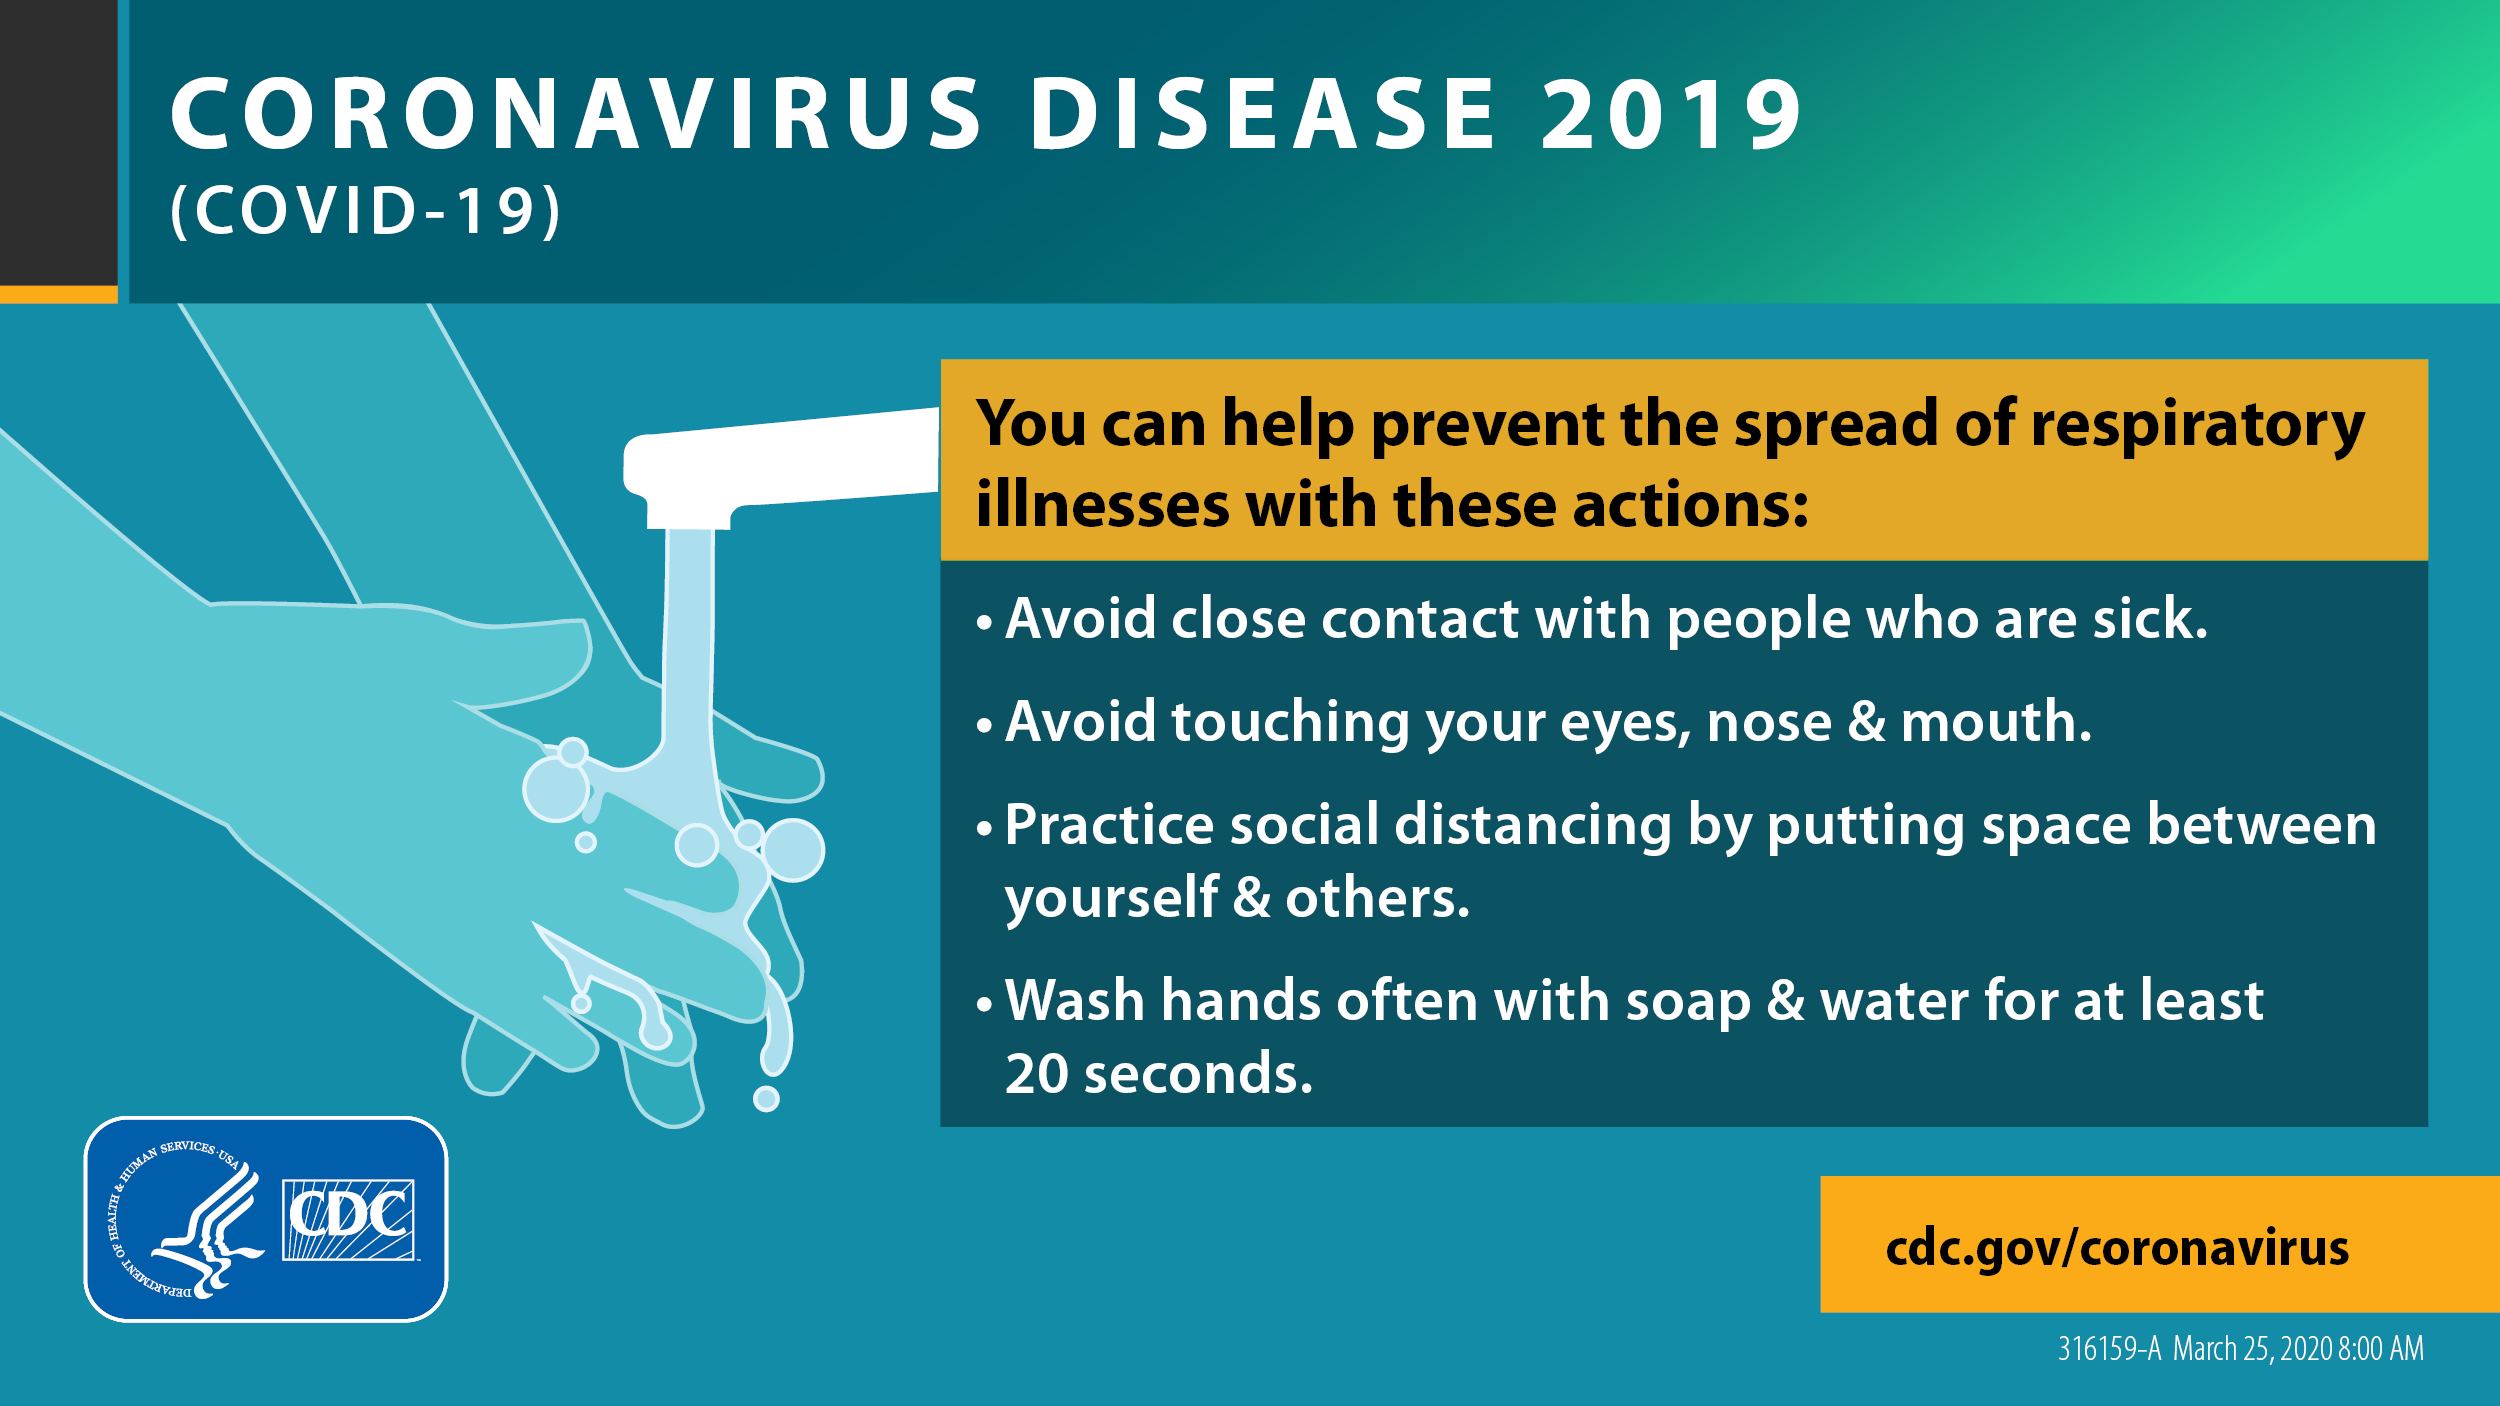 CDC image of person washing hands. Includes facts on preventing the spread of respiratory illnesses. 